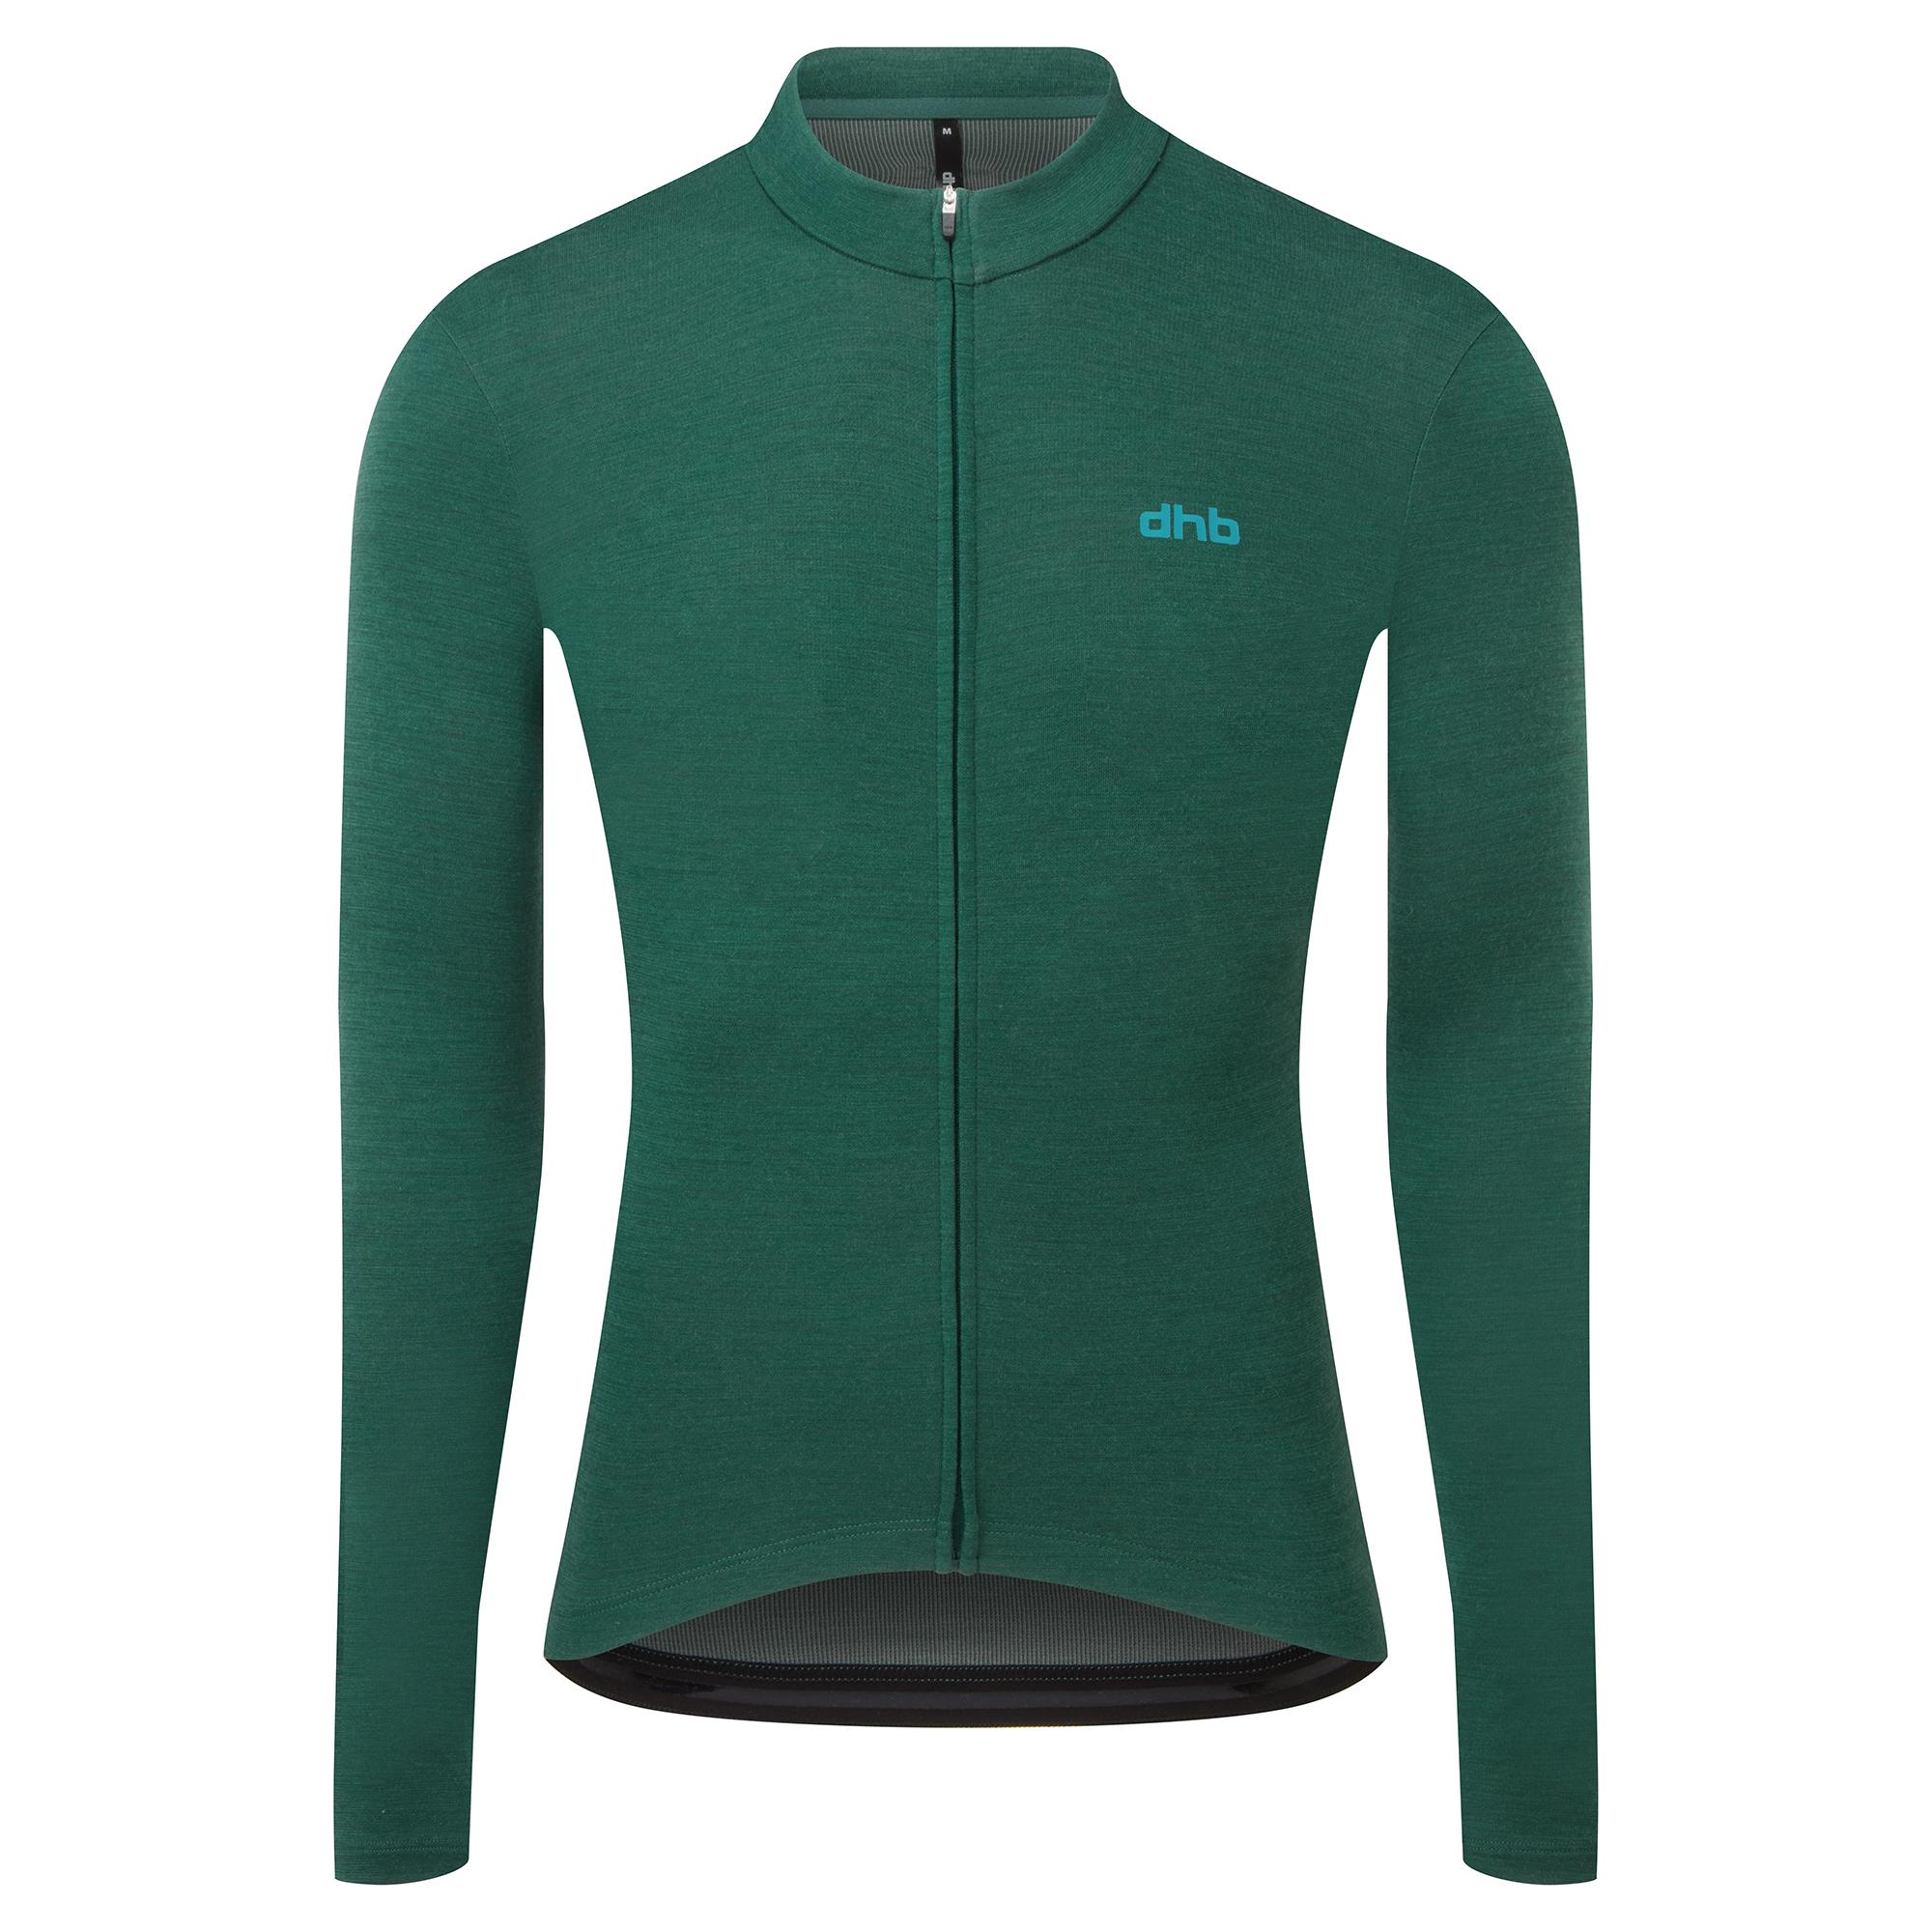 Dhb Merino Long Sleeve Jersey 2.0 - Forest Biome